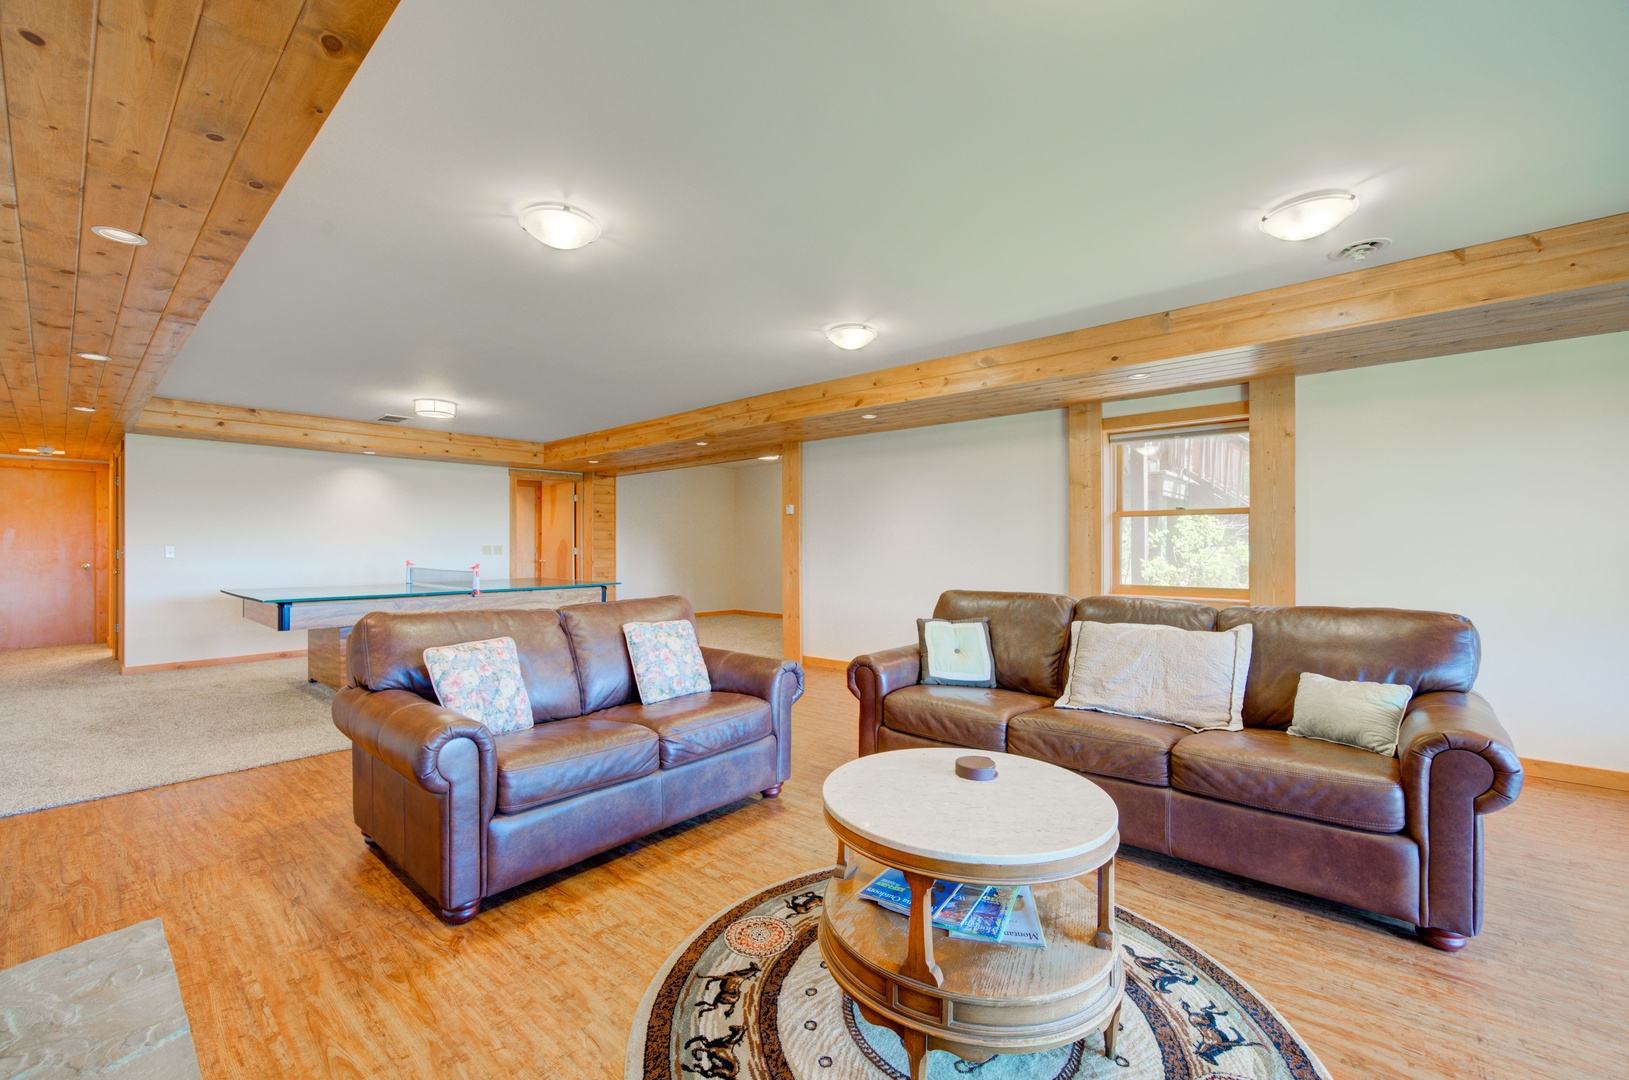 Bozeman Vacation Rentals, The Canyon Lookout - Living area